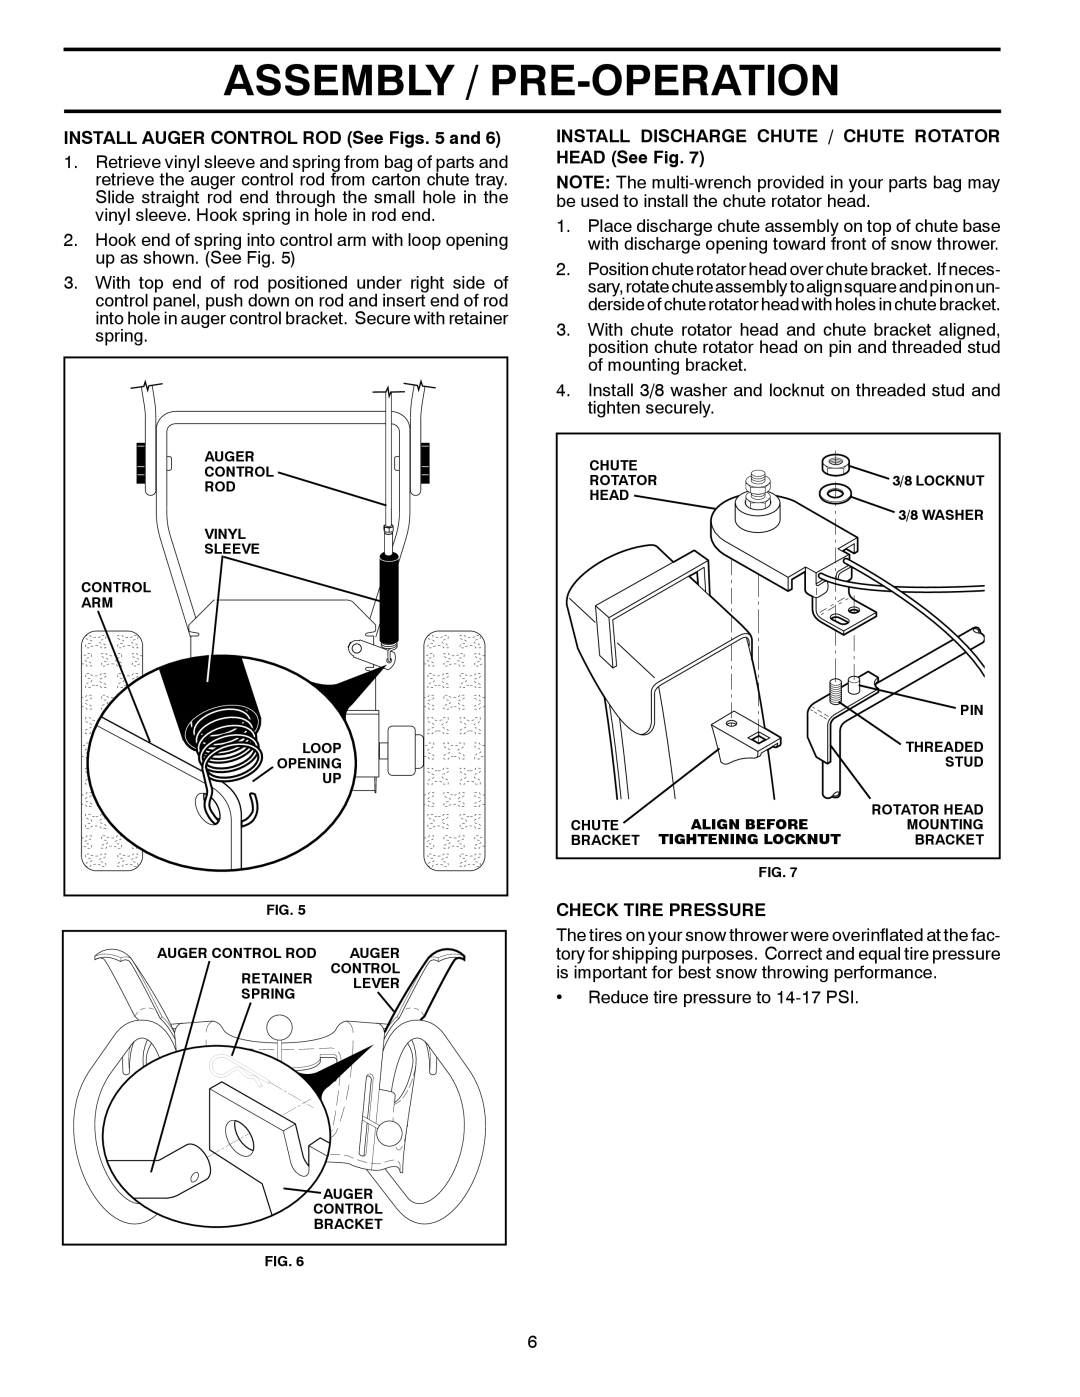 Poulan 96192003300, XT824ES Assembly / Pre-Operation, INSTALL AUGER CONTROL ROD See Figs. 5 and, Check Tire Pressure 